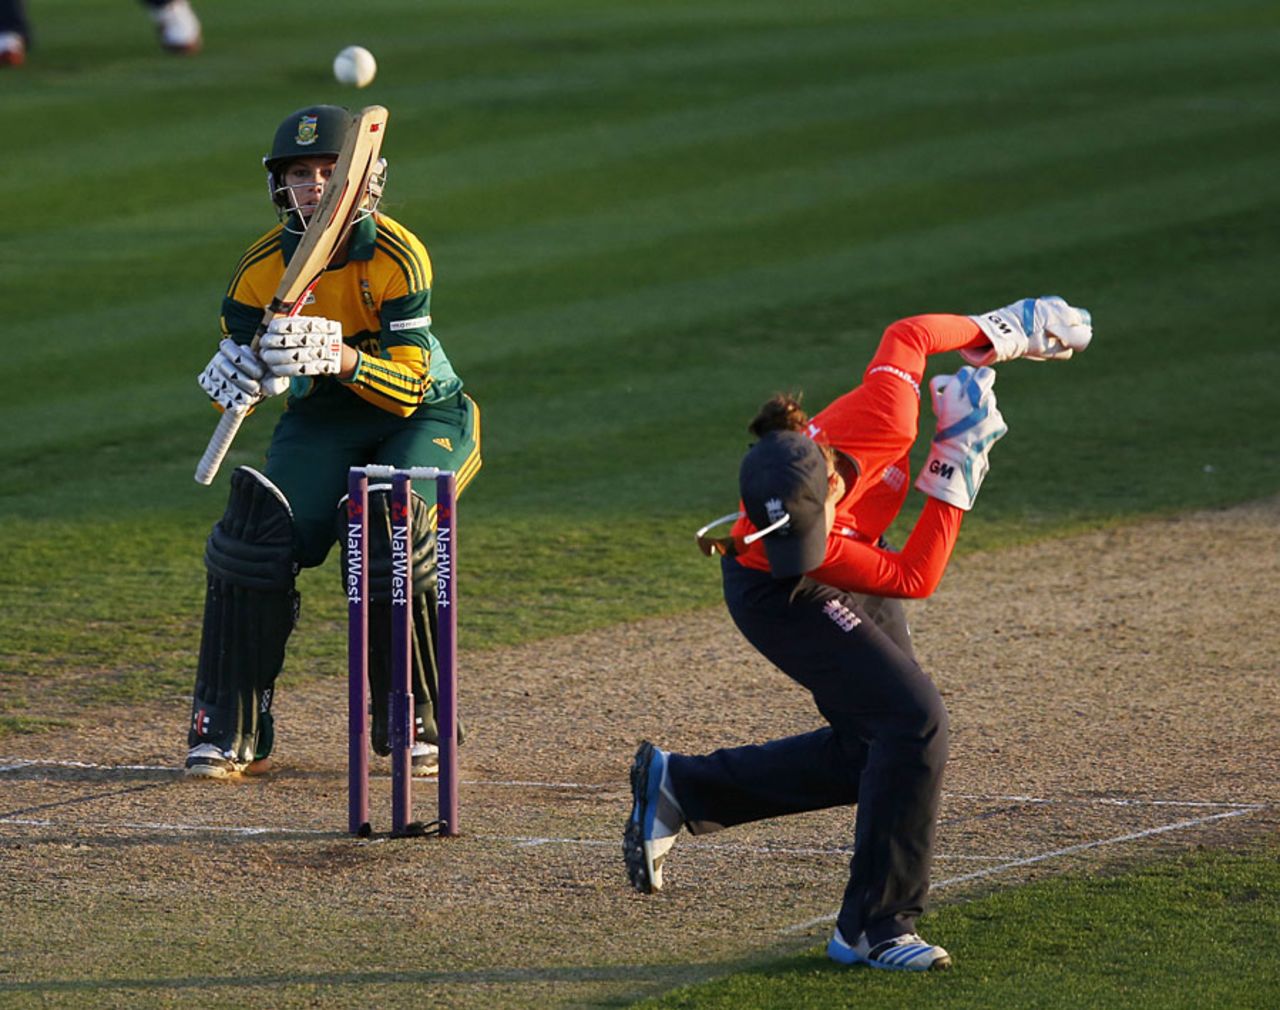 Sarah Taylor almost took a ball in the face, England v South Africa, 1st women's T20, Chelmsford, September 1, 2014